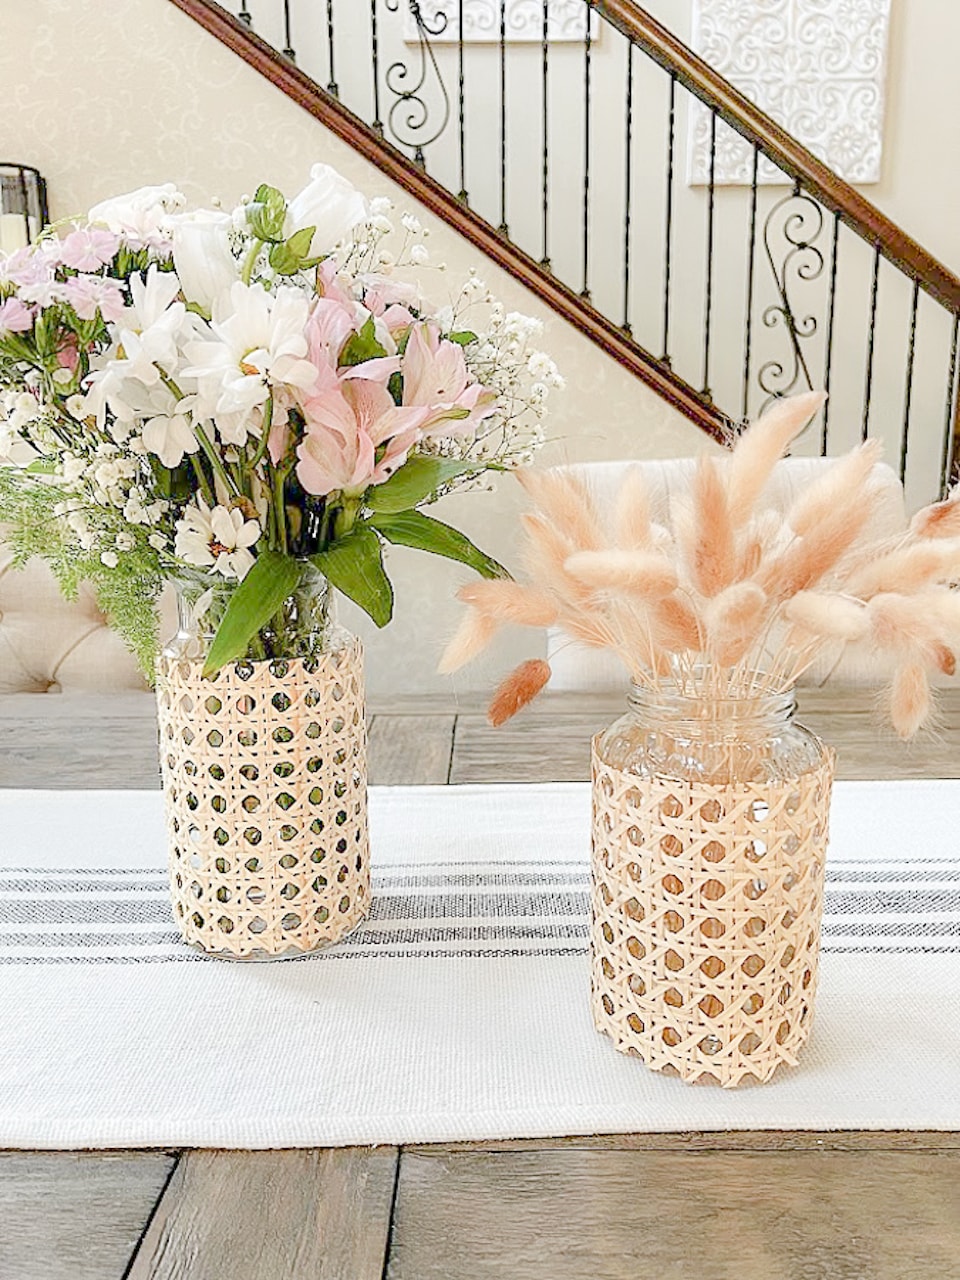 DIY recycling projects upcycled home decor wicker vases